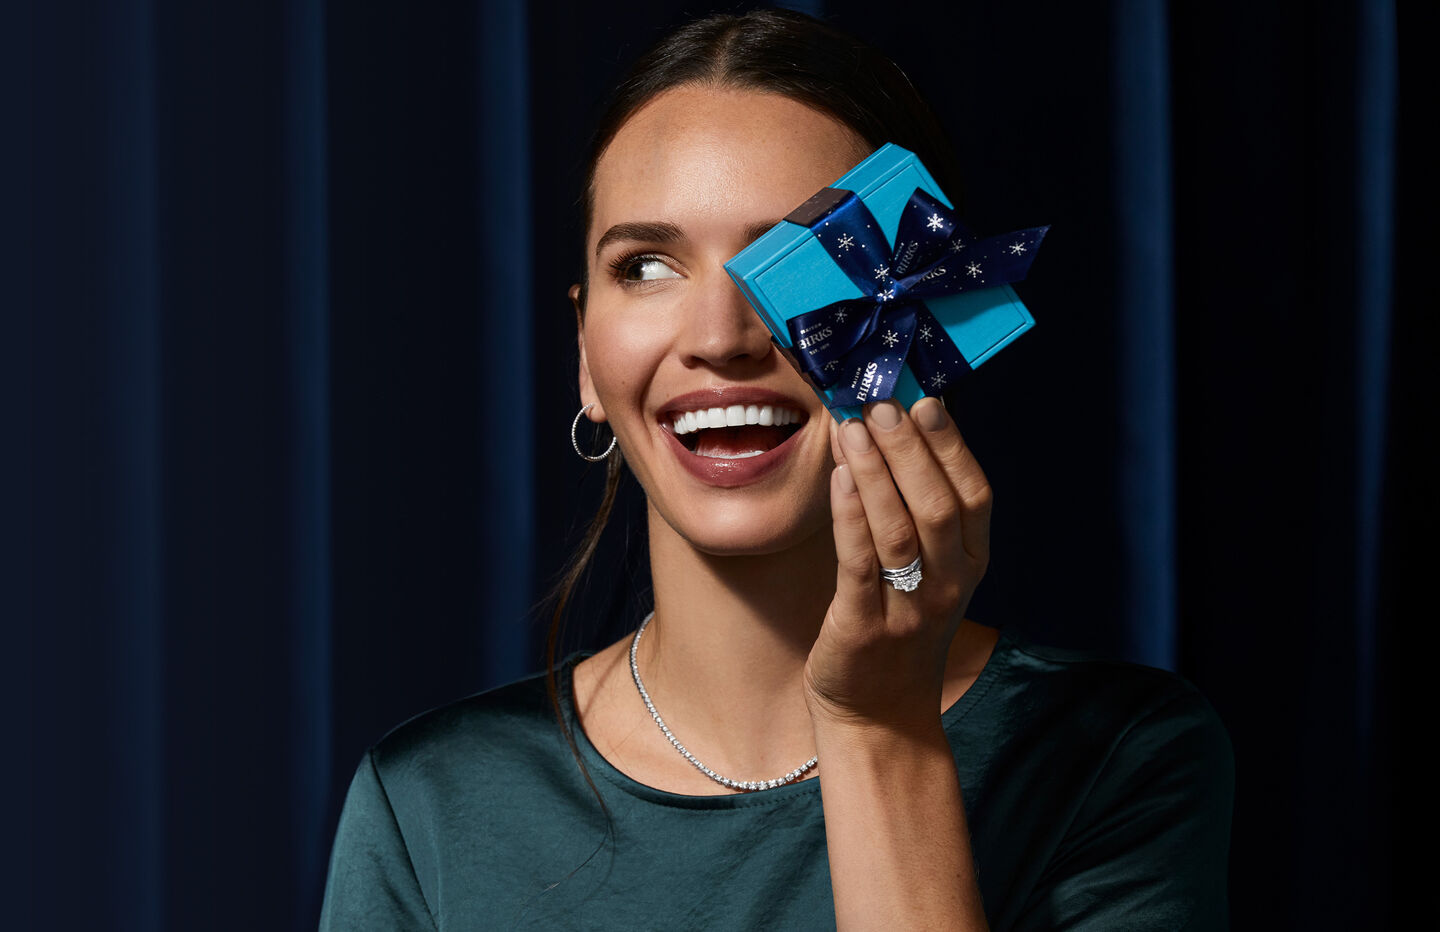 A model smiles while holding up a blue gift wrapped box